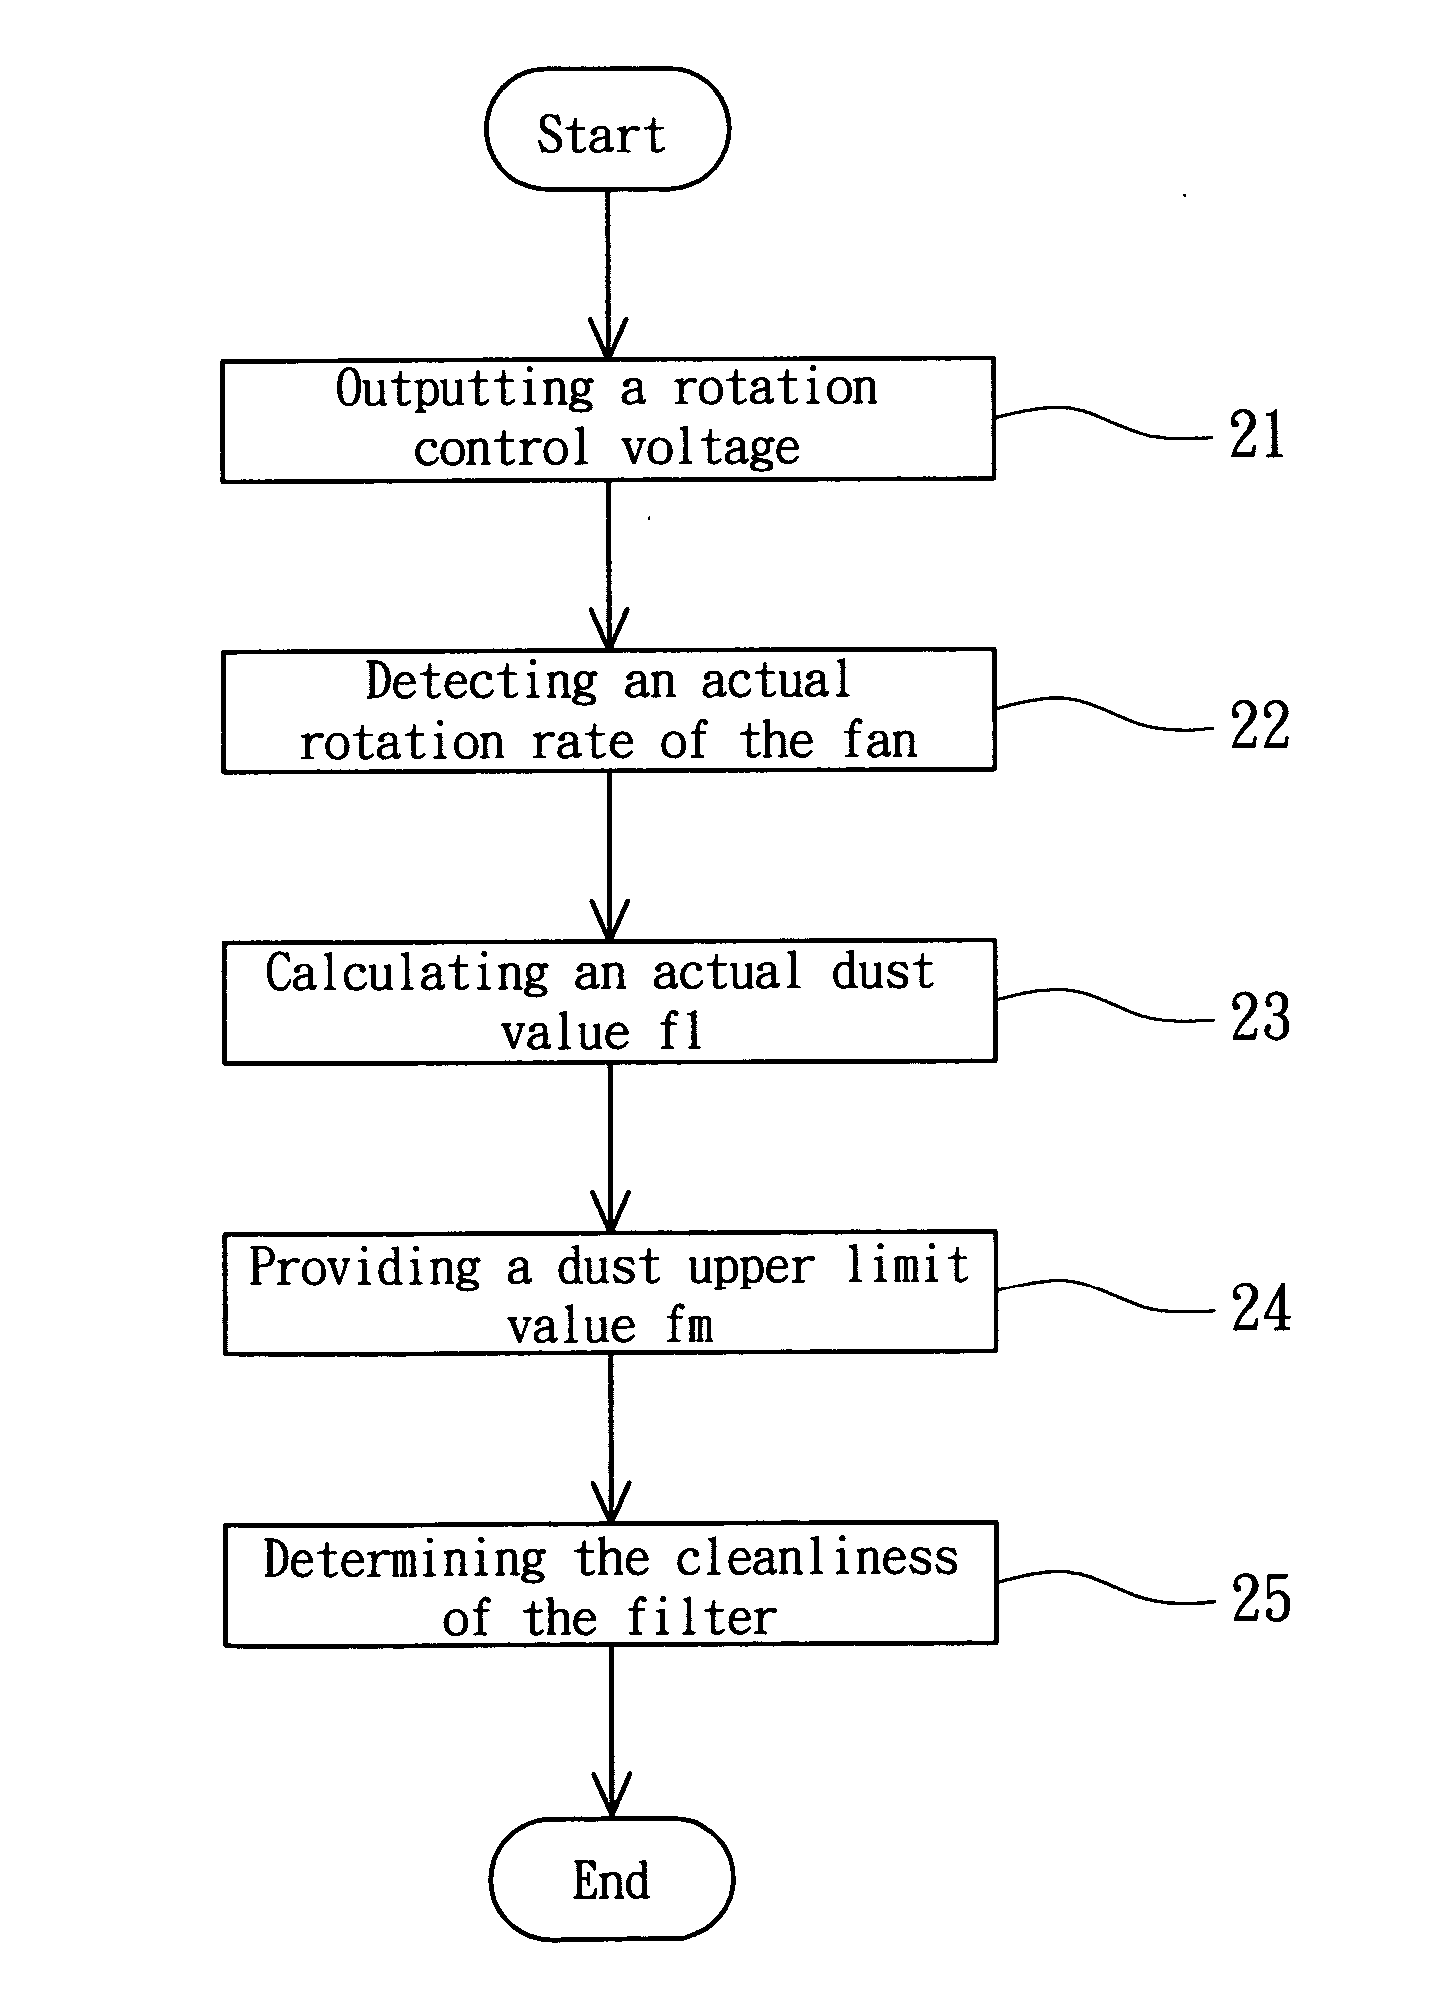 Method for detecting the cleanliness of a filter